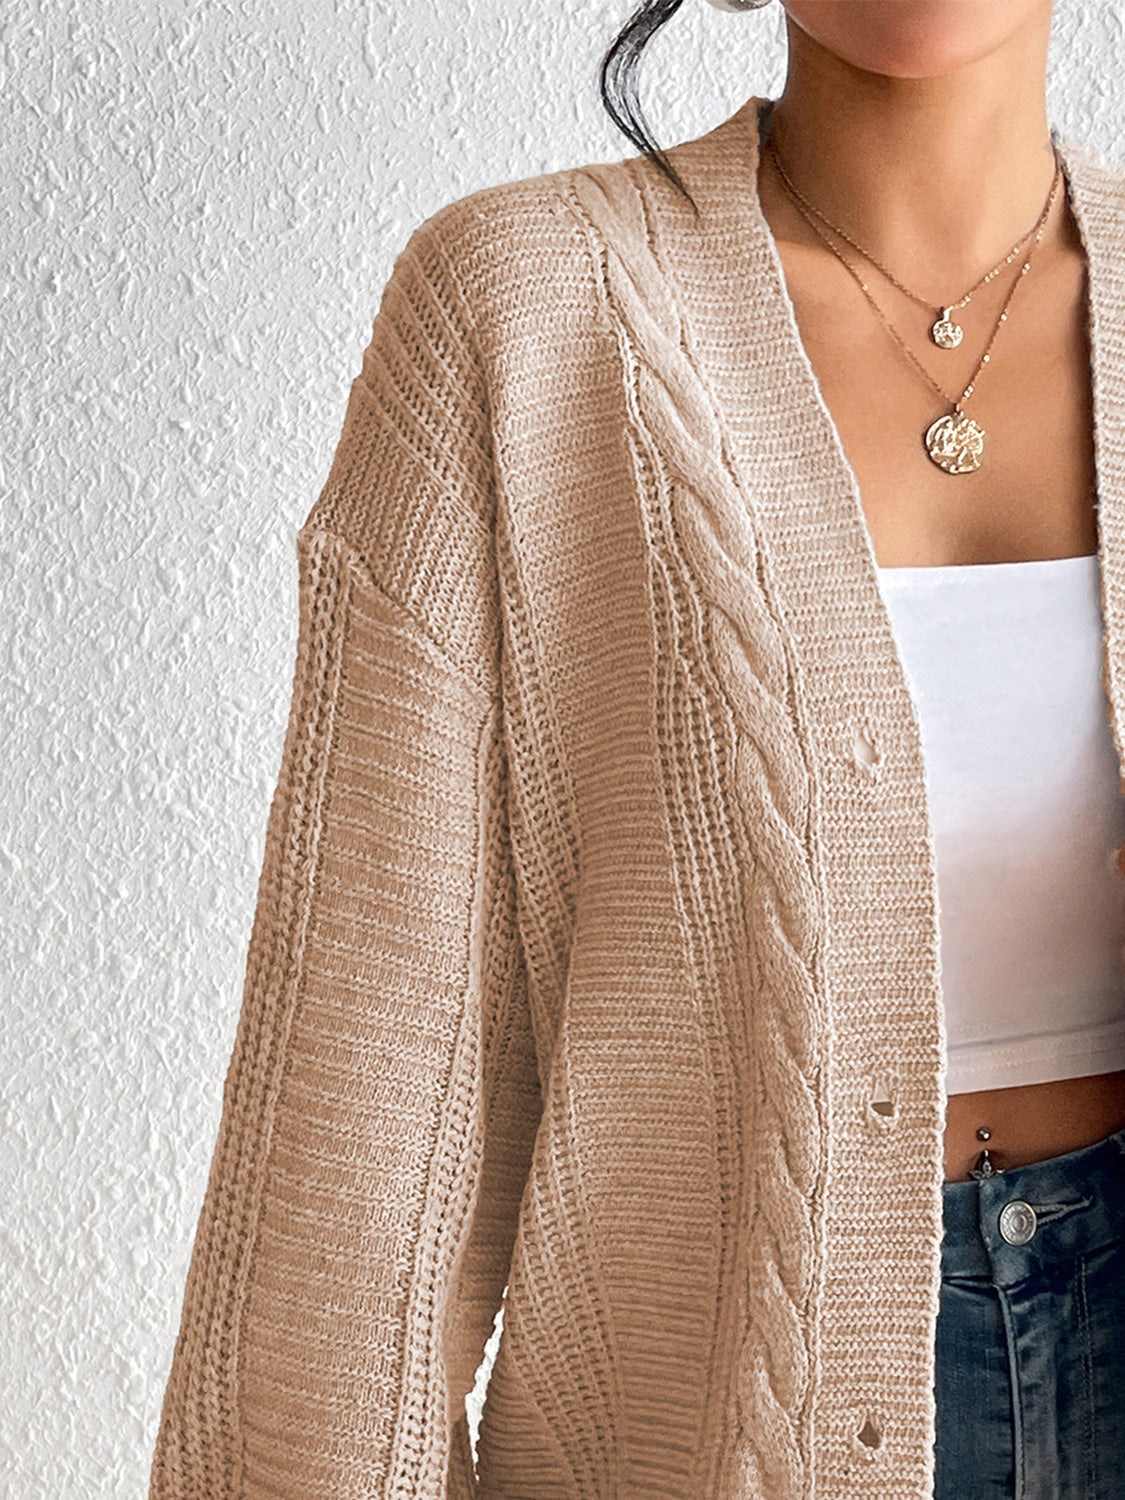 Cable-Knit Button Down Cardigan - Women’s Clothing & Accessories - Shirts & Tops - 8 - 2024